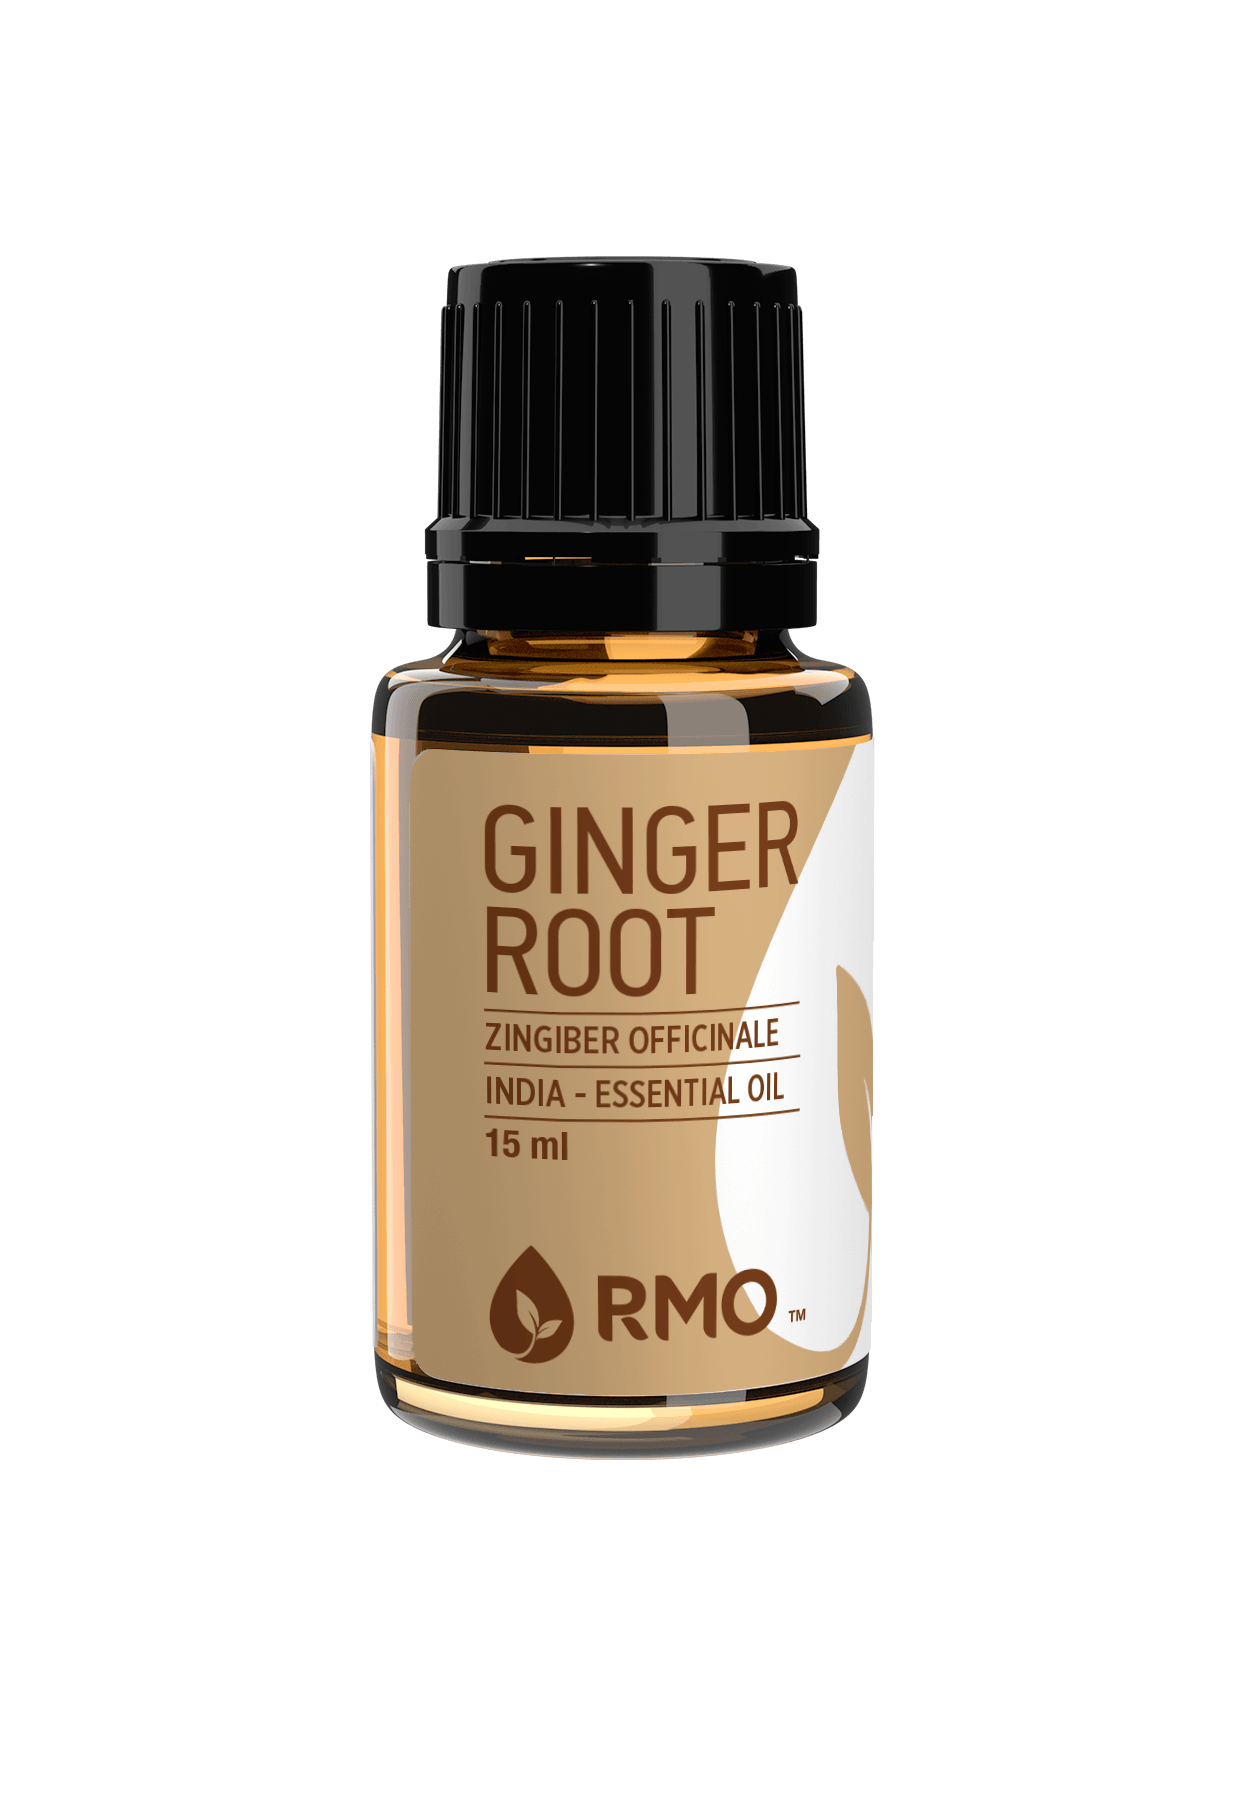 rocky mountain oils, essential oils, ginger root